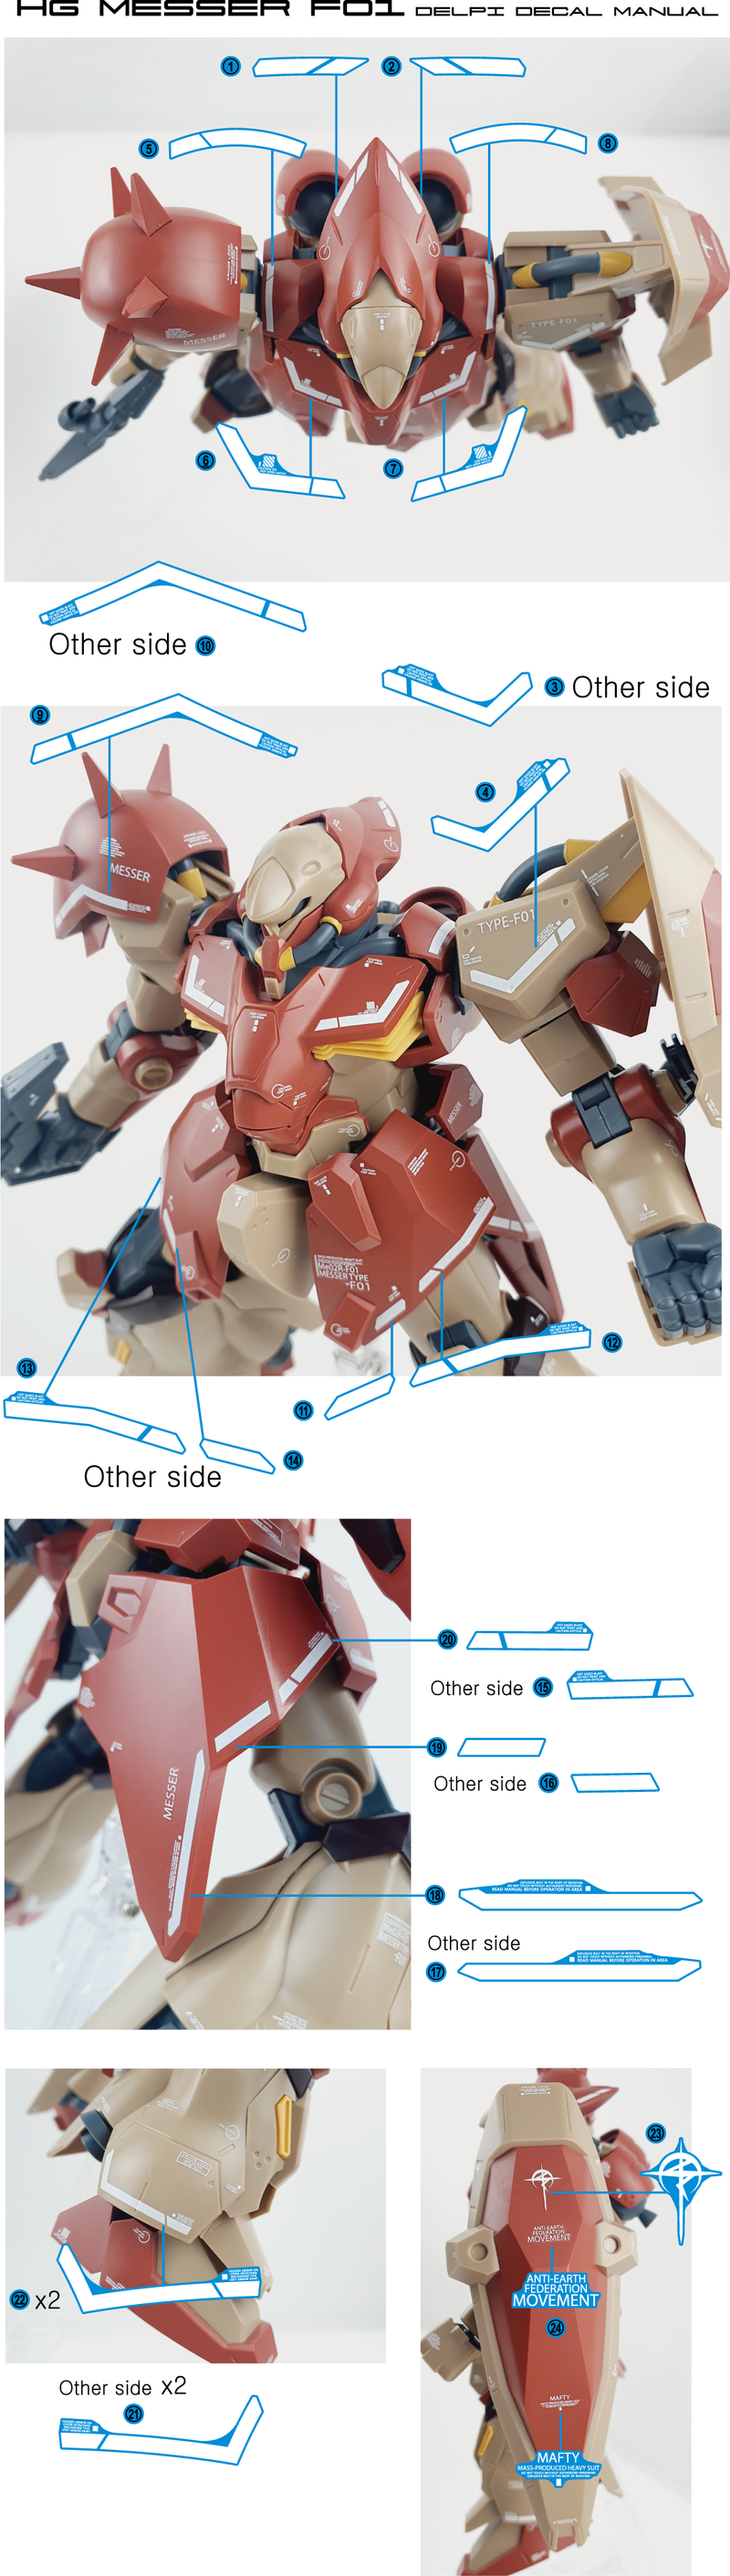 Delpi Decal - HG Messer F01 Water Decal (3 Types)